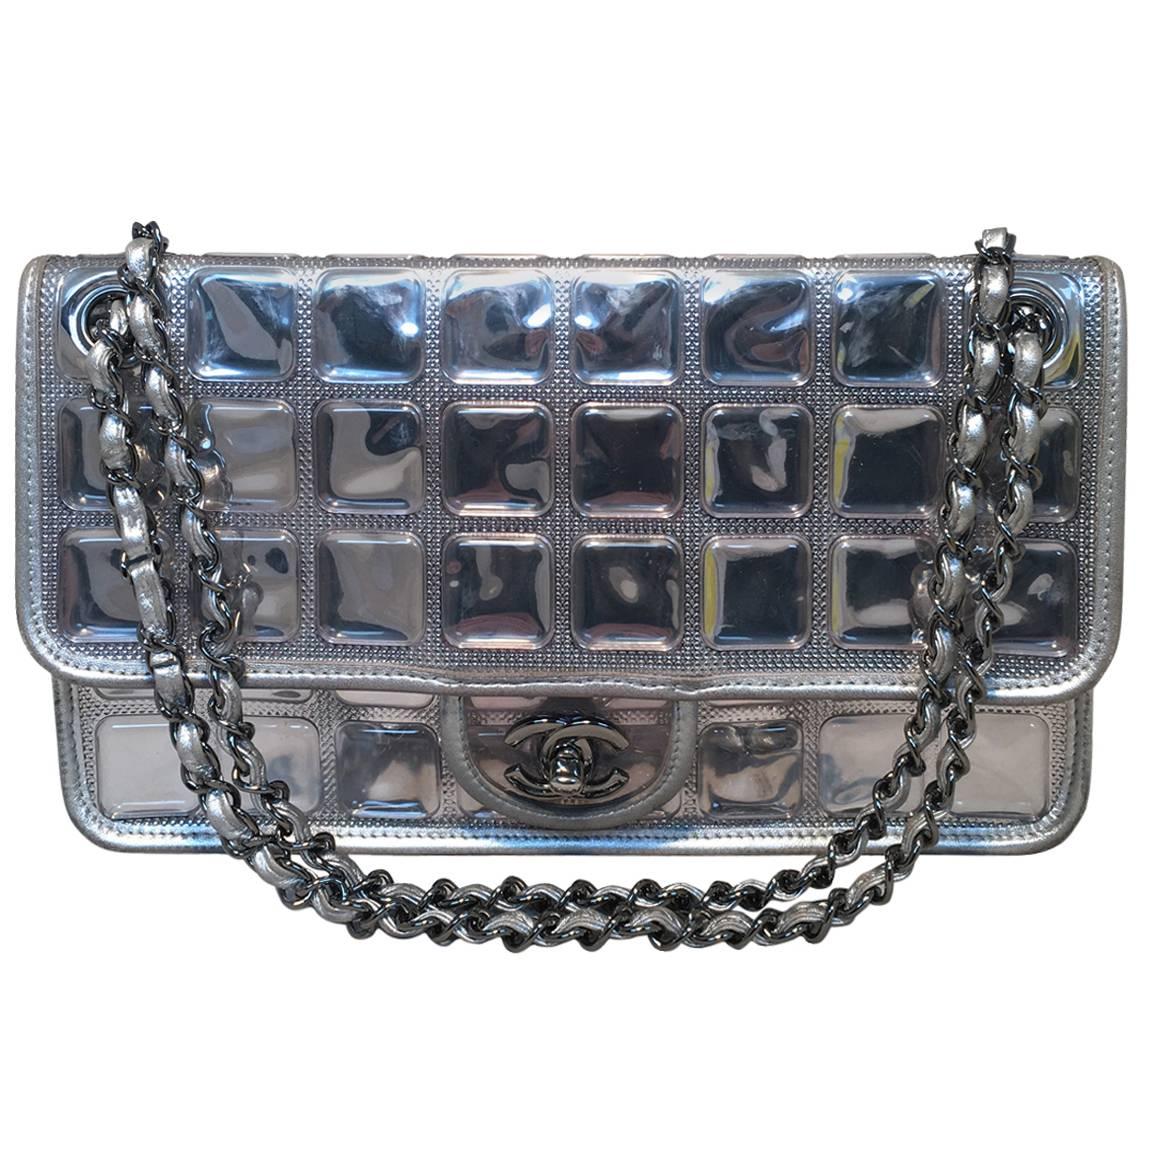 LIMITED EDITION Chanel Silver Ice Cube Classic Flap Shoulder Bag